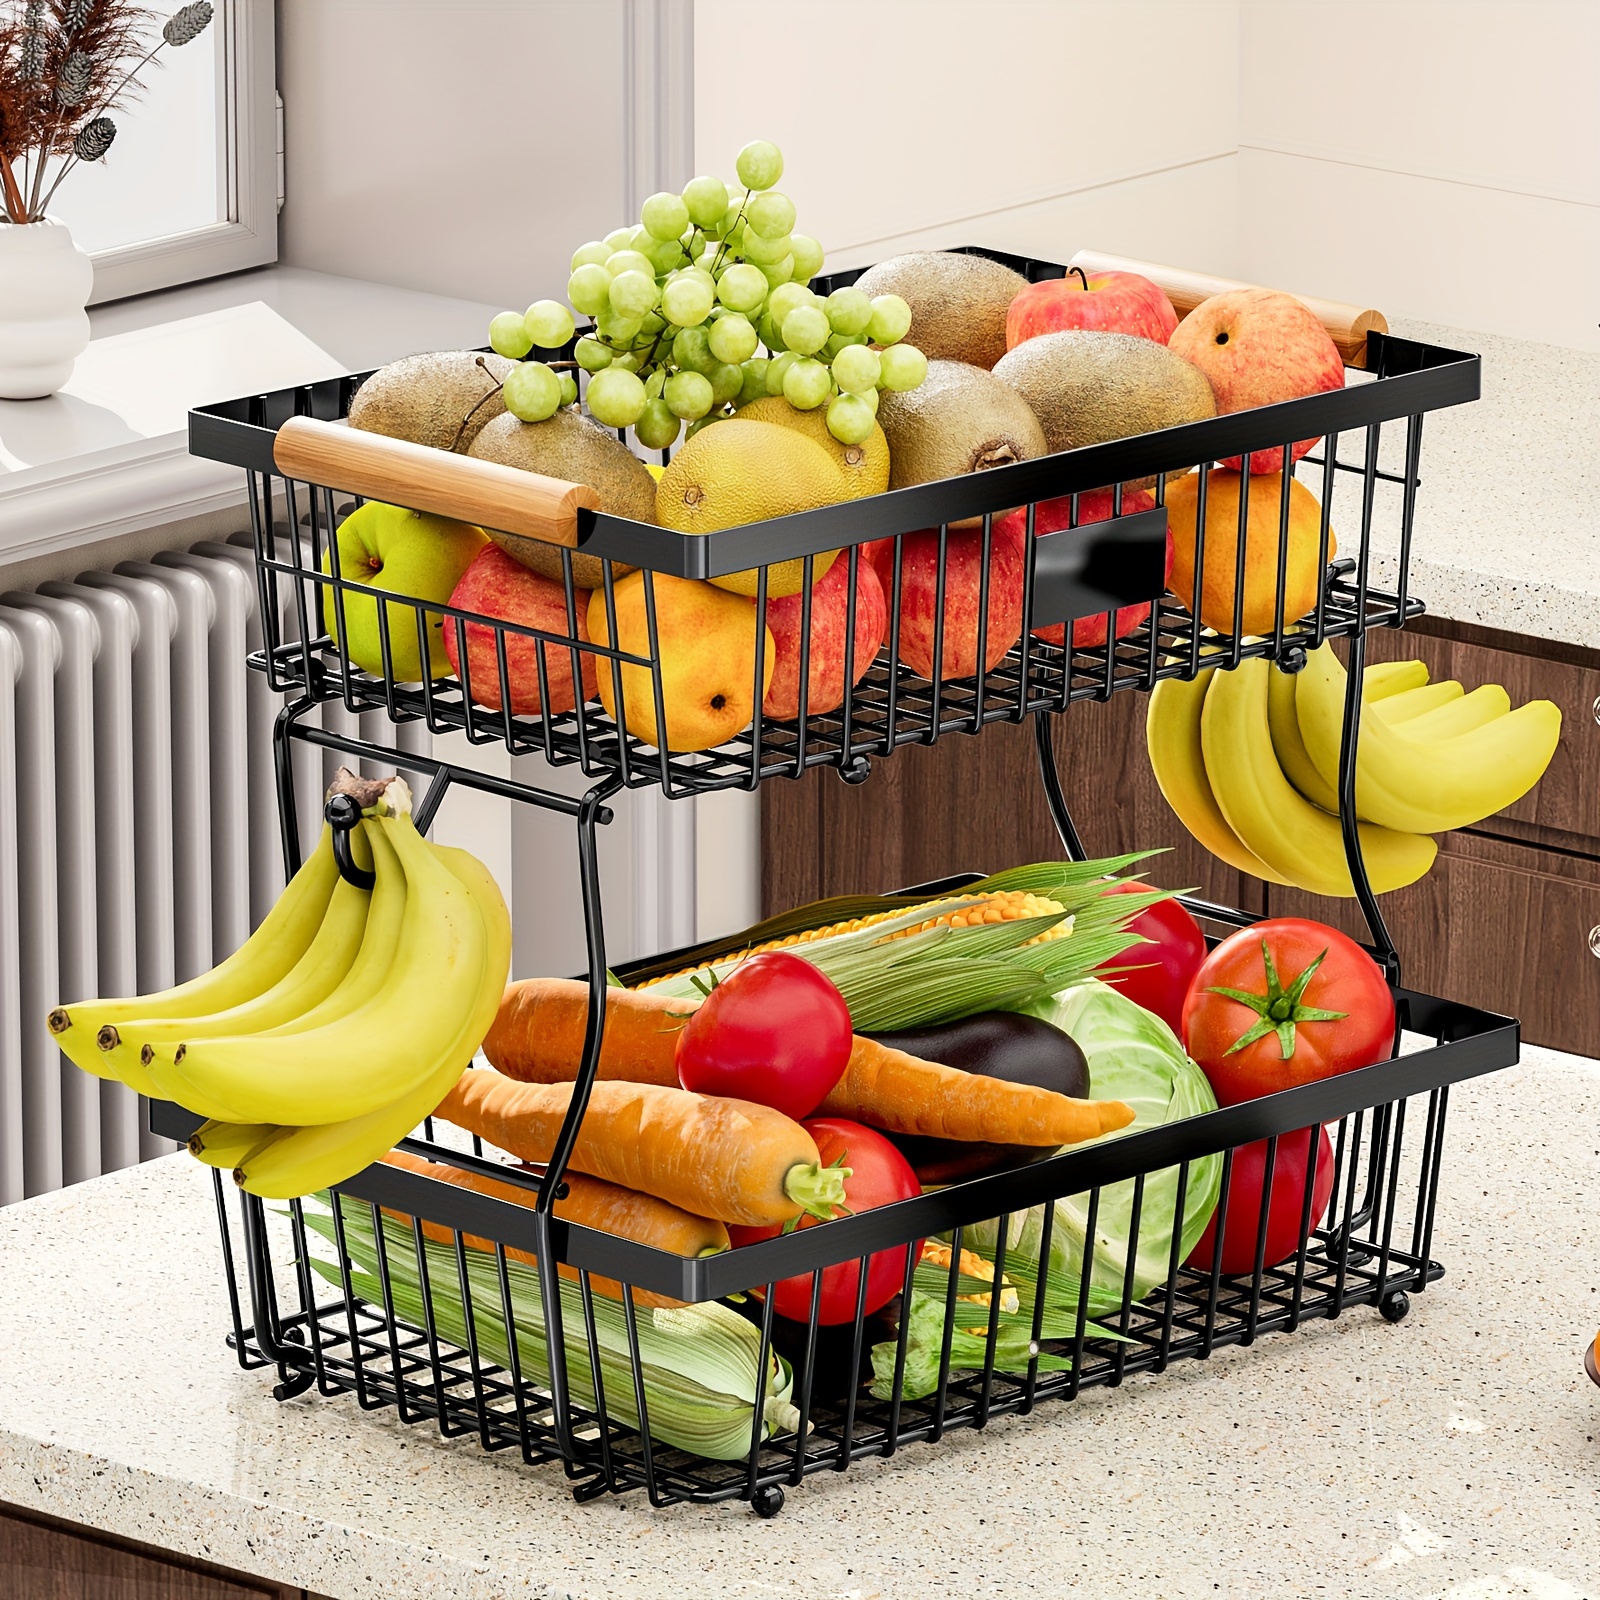 

1pc 2-tier Countertop Fruit Vegetable Basket For Kitchen With Wood Handle And 2 Banana Hangers, Detachable Organizer For Bread Vegetable, Large Capacity Storage Stand, Black